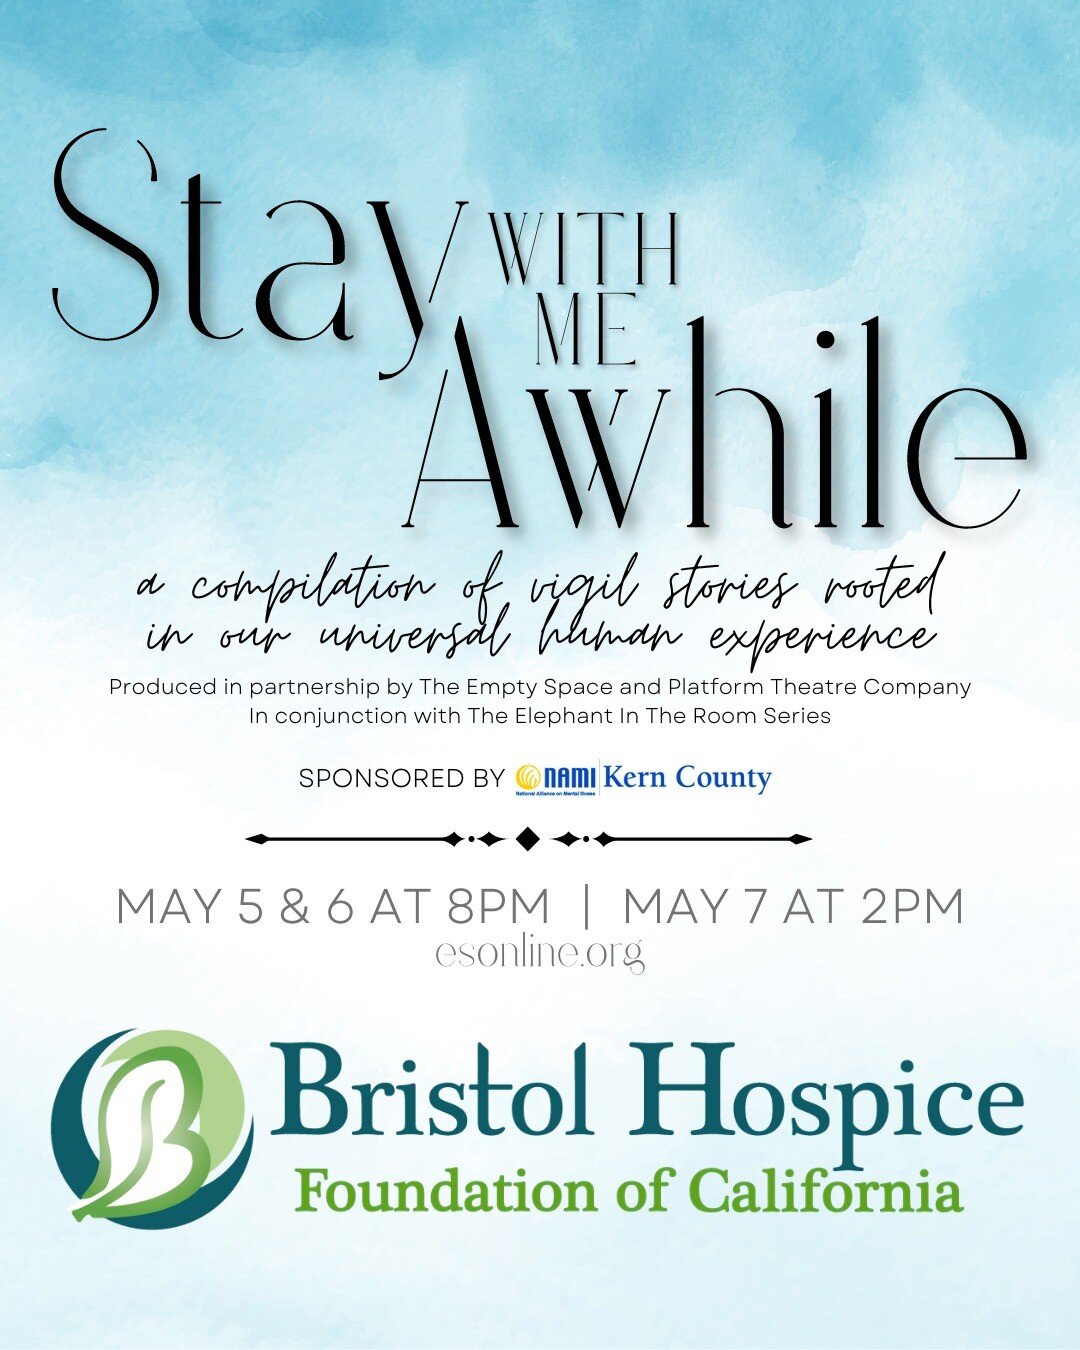 Tonight we welcome Bristol Hospice Bakersfield for a special preview performance of STAY WITH ME AWHILE, a compilation of vigil stories rooted in our universal human experience. The group will enjoy a pre-show reception in our gallery and get to expe